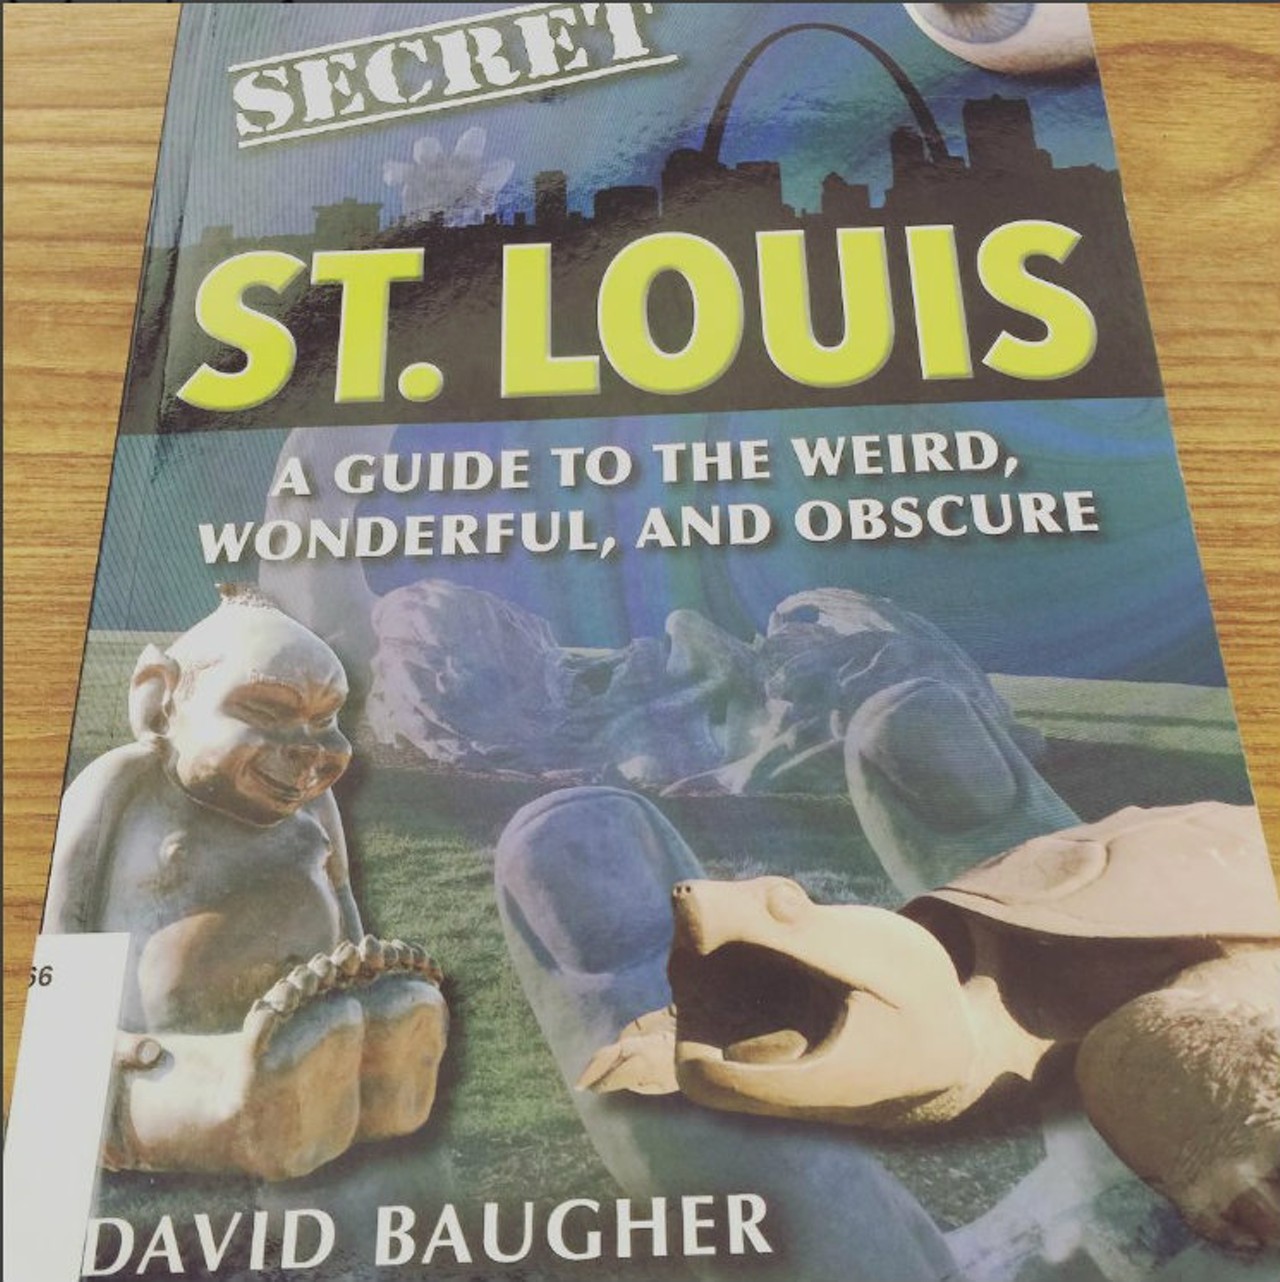 Secret St. Louis by David Baugher
We all have that one friend who thinks they know everything. Enlighten them with not-yet-learned knowledge about the city you love. This book is a guide to weird, wonderful and scarcely known facts about St. Louis, from where you can picnic at a radioactive waste dump to where you can find a nudist resort. Photo courtesy of Instagram / davewise82.